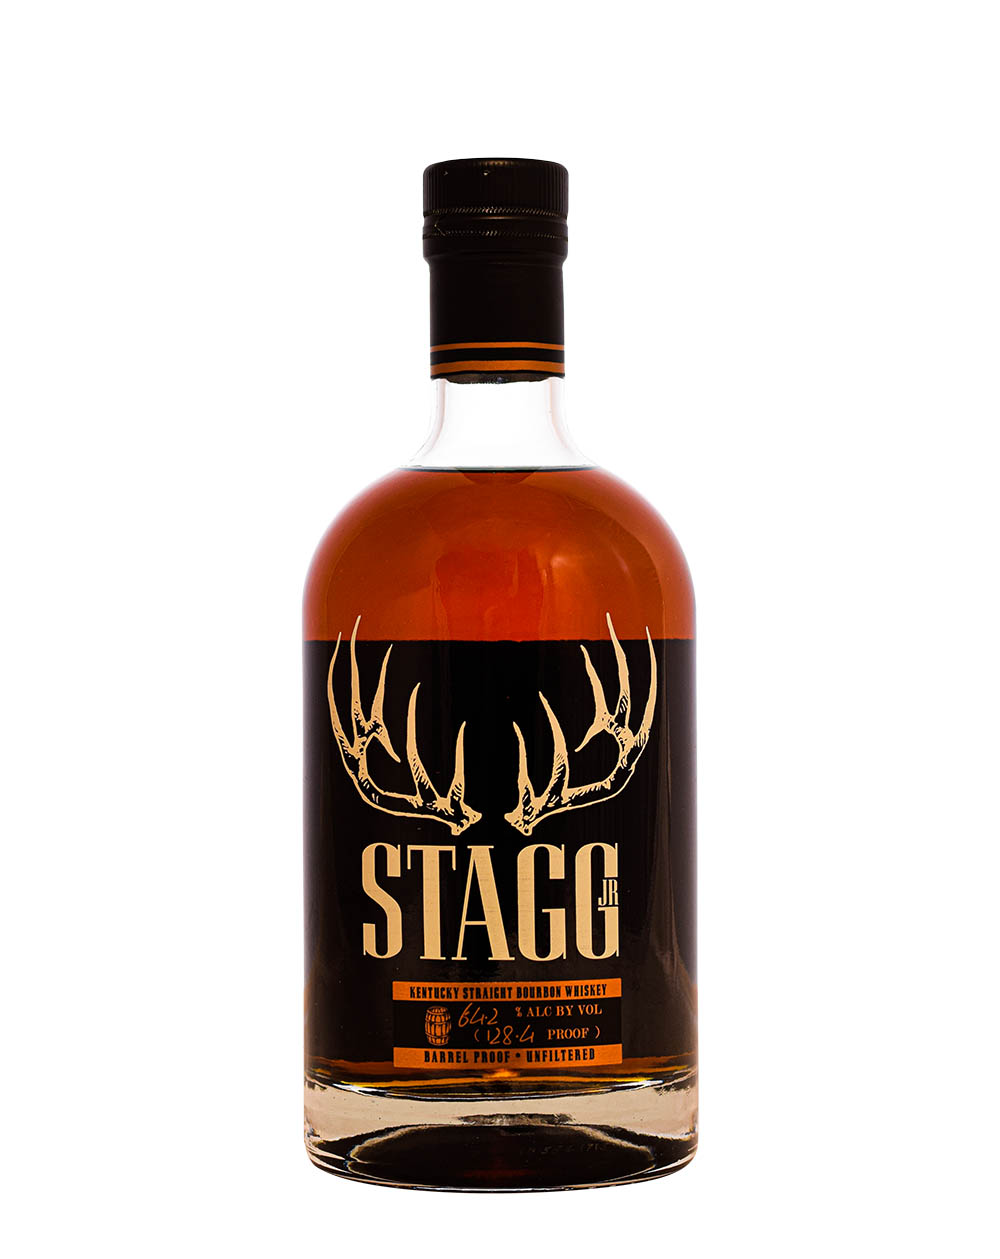 Stagg Jr. 2019 Batch 13 128.4 Proof Musthave Malts MHM